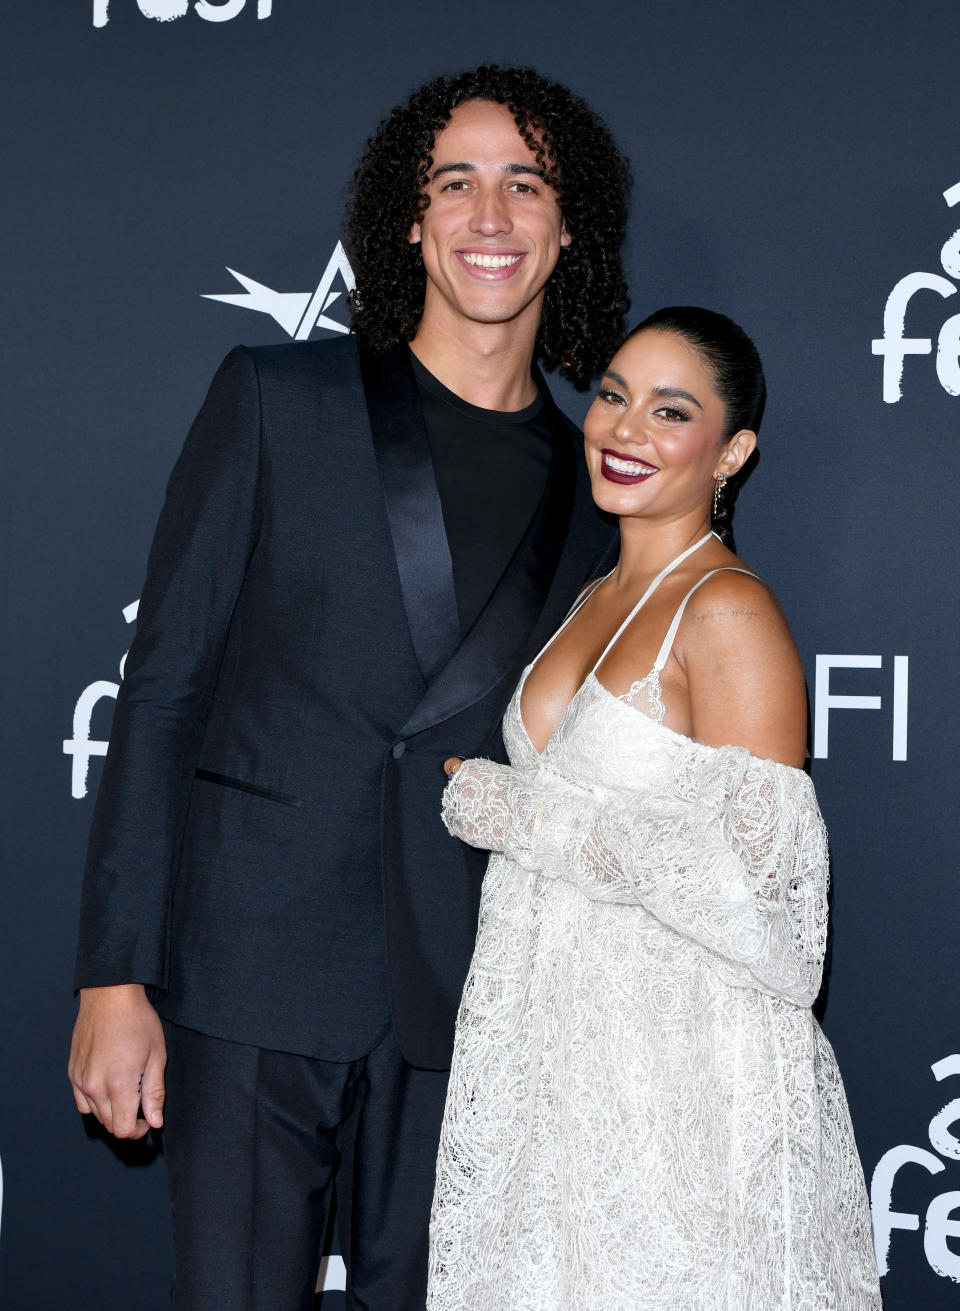 HOLLYWOOD, CALIFORNIA - NOVEMBER 10: Cole Tucker and Vanessa Hudgens attend the 2021 AFI Fest - Opening Night Gala Premiere of Netflix's "tick, tick…BOOM" at TCL Chinese Theatre on November 10, 2021 in Hollywood, California. (Photo by Axelle/Bauer-Griffin/FilmMagic)